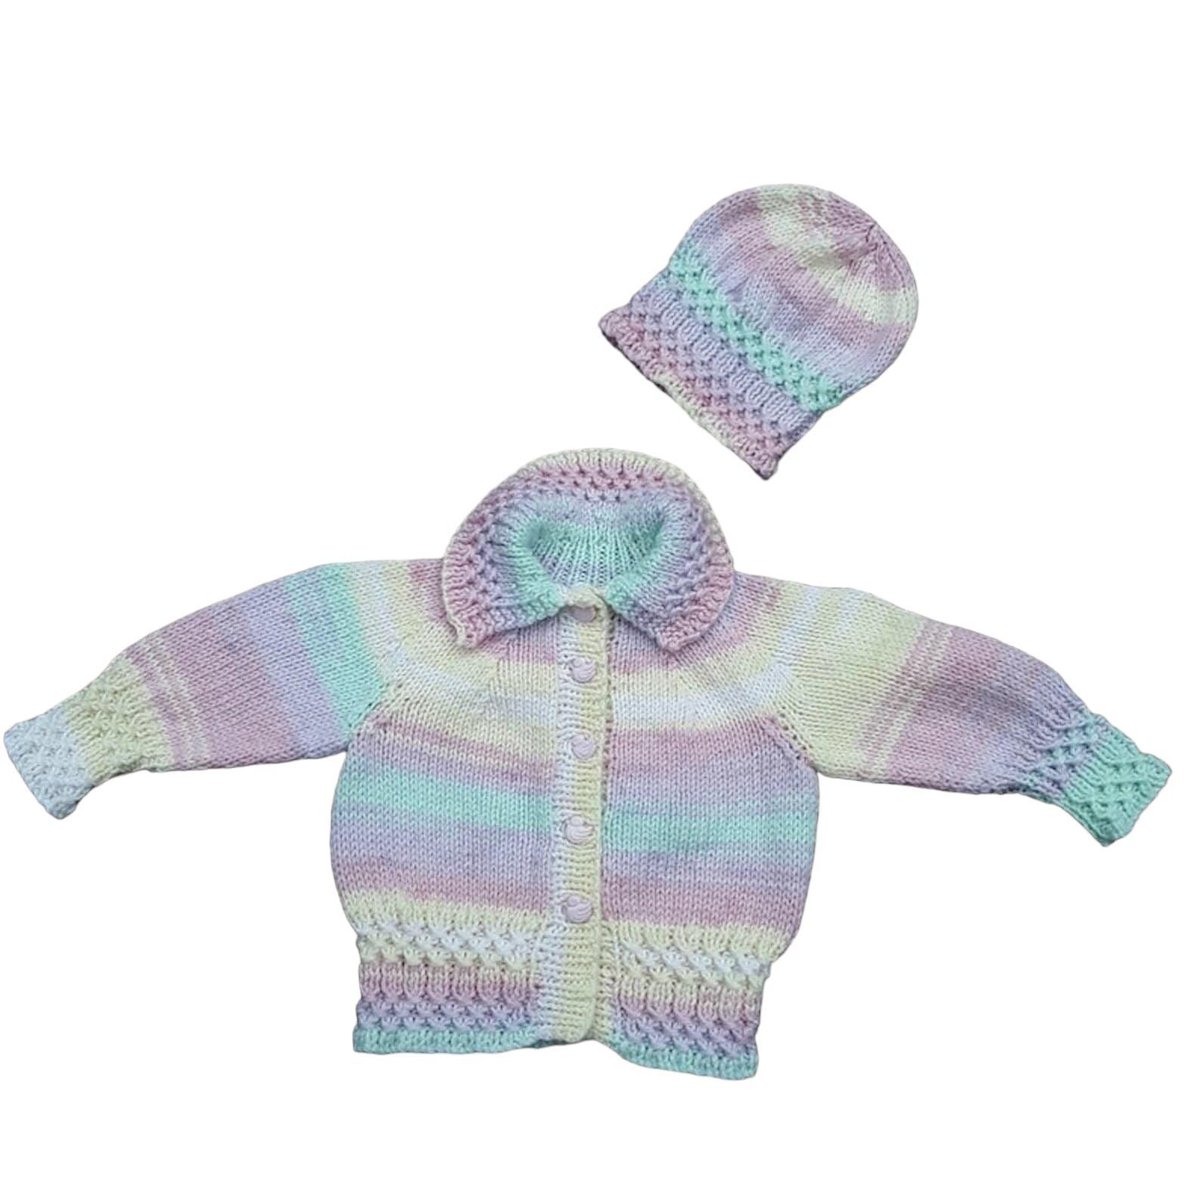 Discover the charm of hand-knitted baby clothes. This multicolour pastel cardigan and hat set (0-6 months) is a heartwarming gift. Visit #Etsy to order now. Your little one deserves the best! knittingtopia.etsy.com/listing/167120… #knittingtopia #craftbizparty #MHHSBD #babyessentials